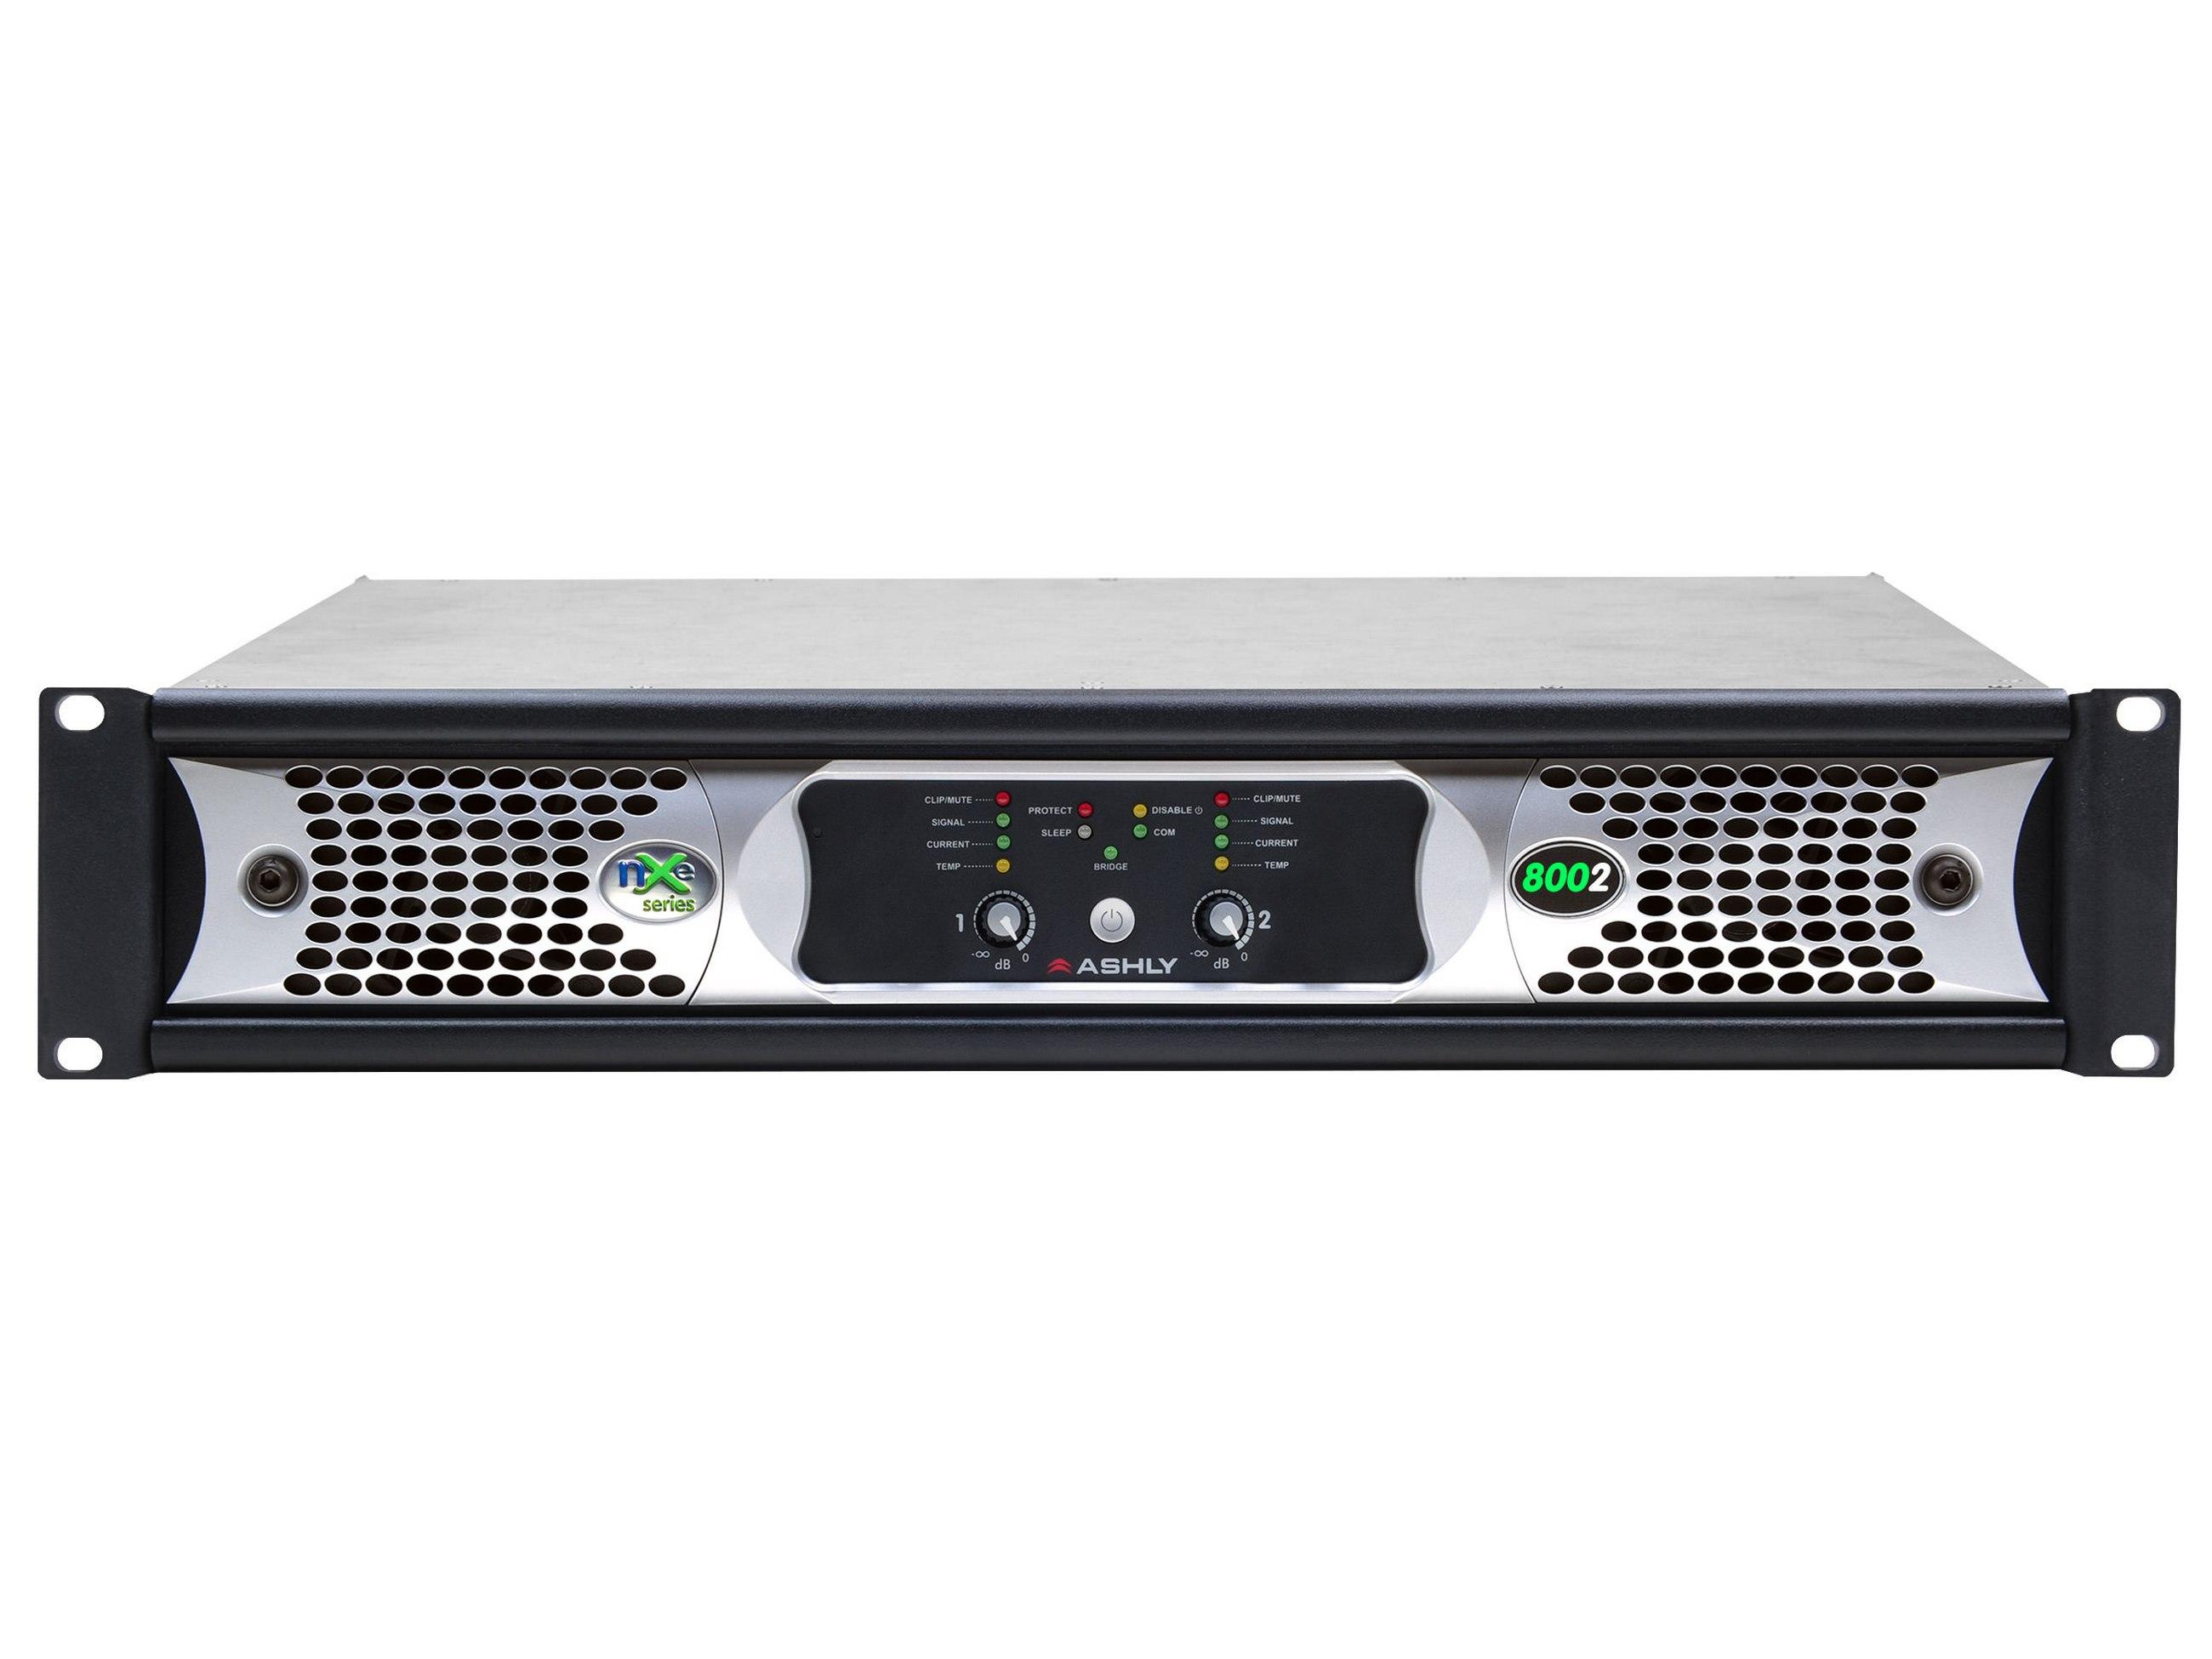 nXe8002bd 2x 800 Watts/2 Ohms Network Power Amplifier with OPDante and OPDAC4 Option Cards by Ashly